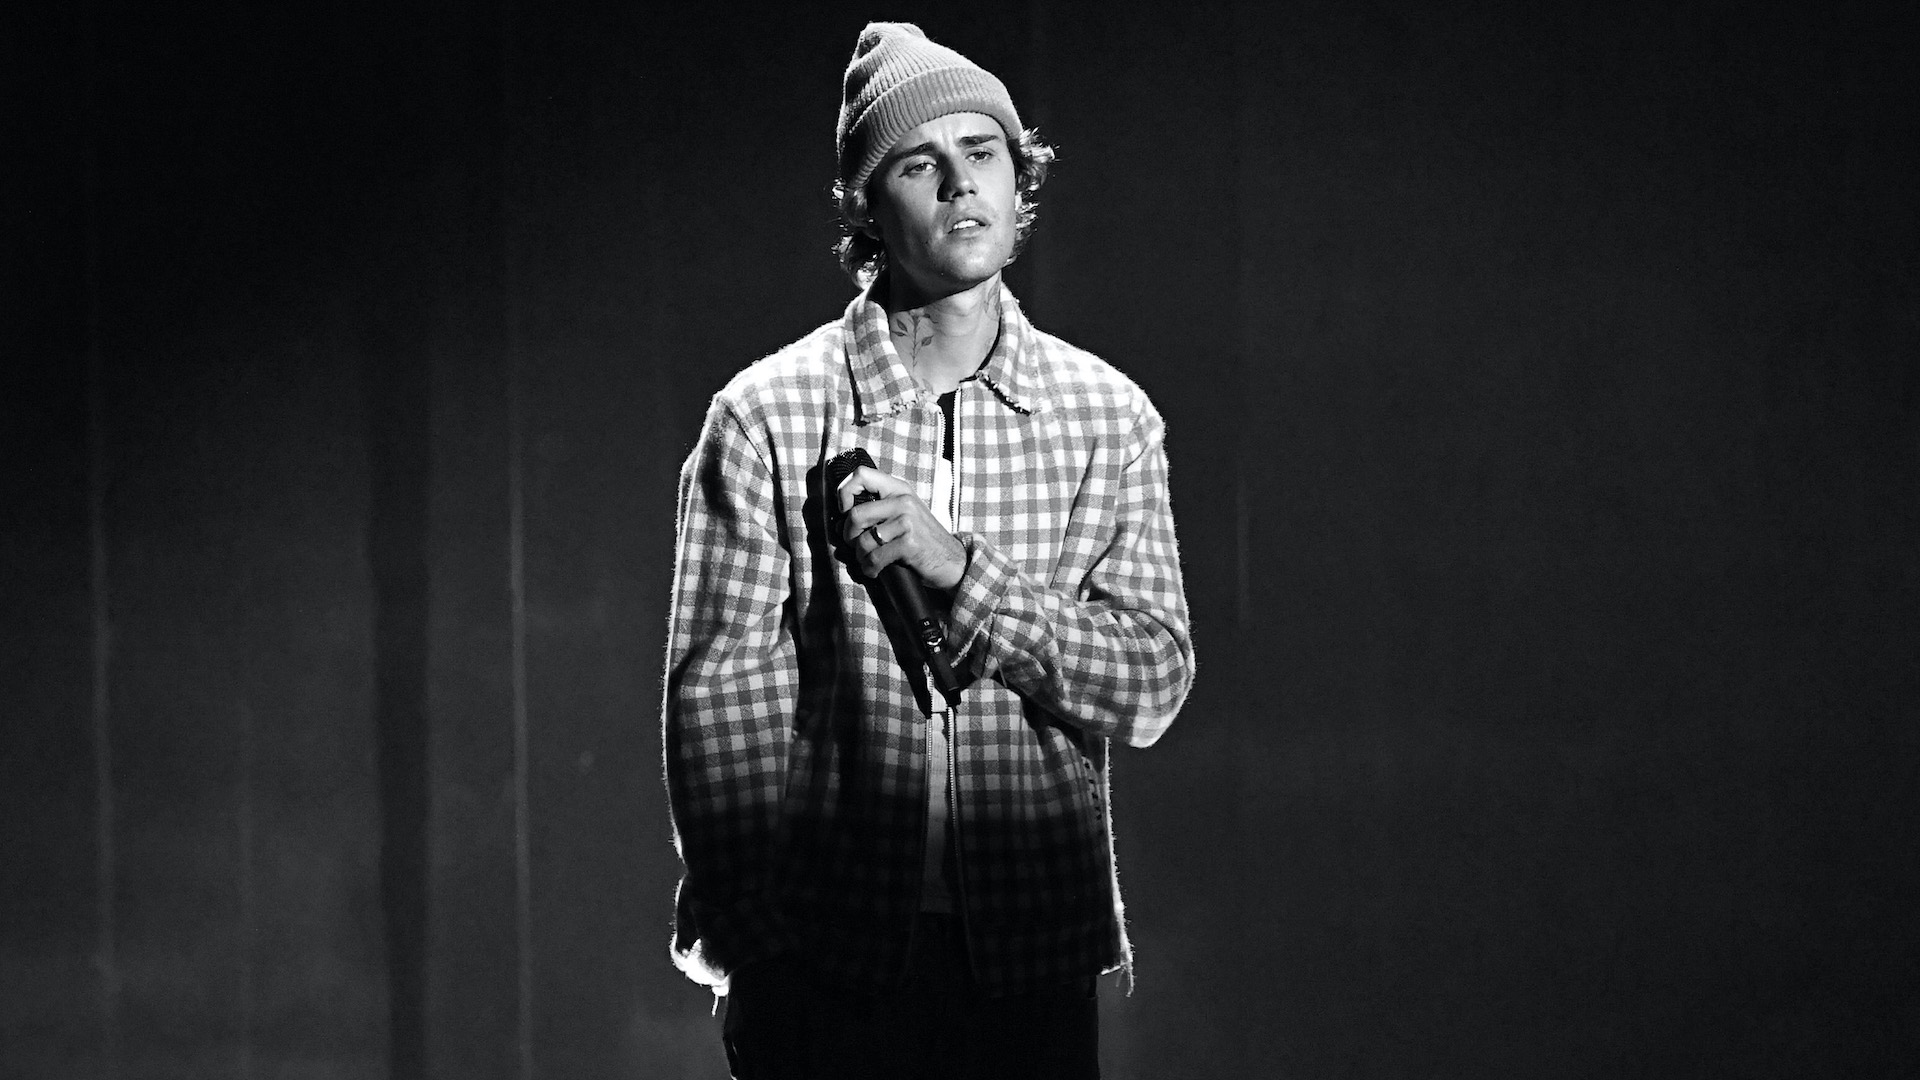 Justin Bieber Drops Video for New Song “Hold On”